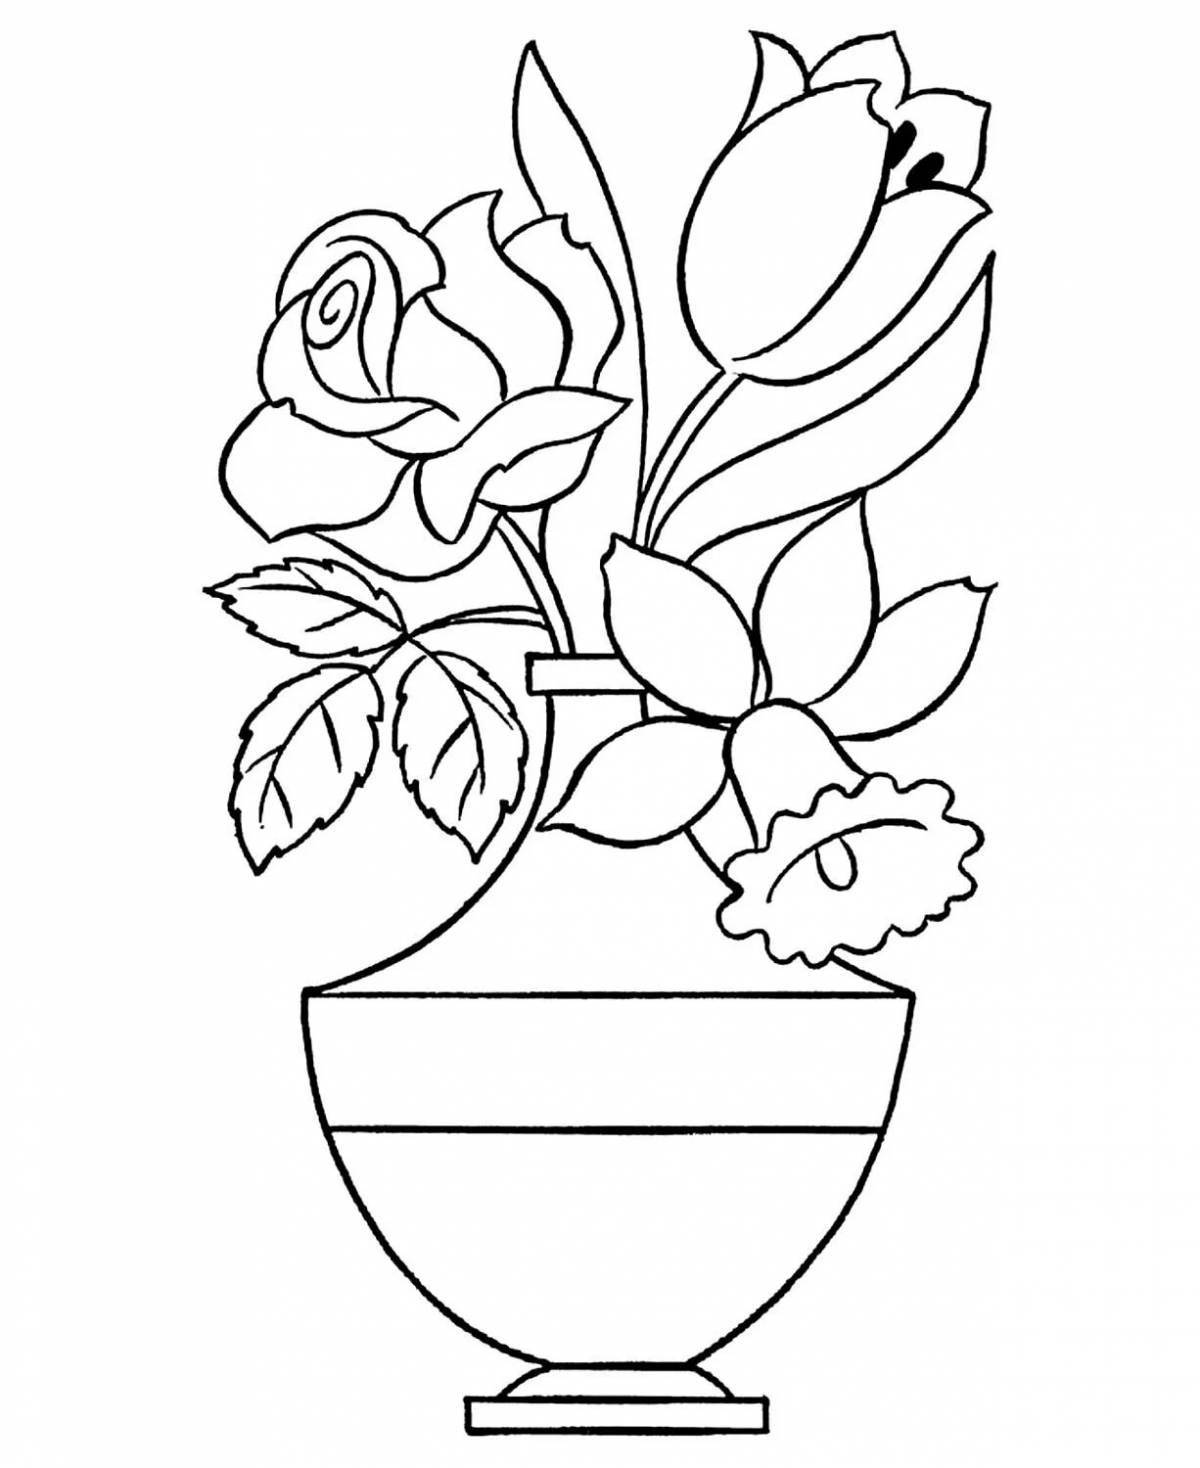 Stylish coloring of roses in a vase